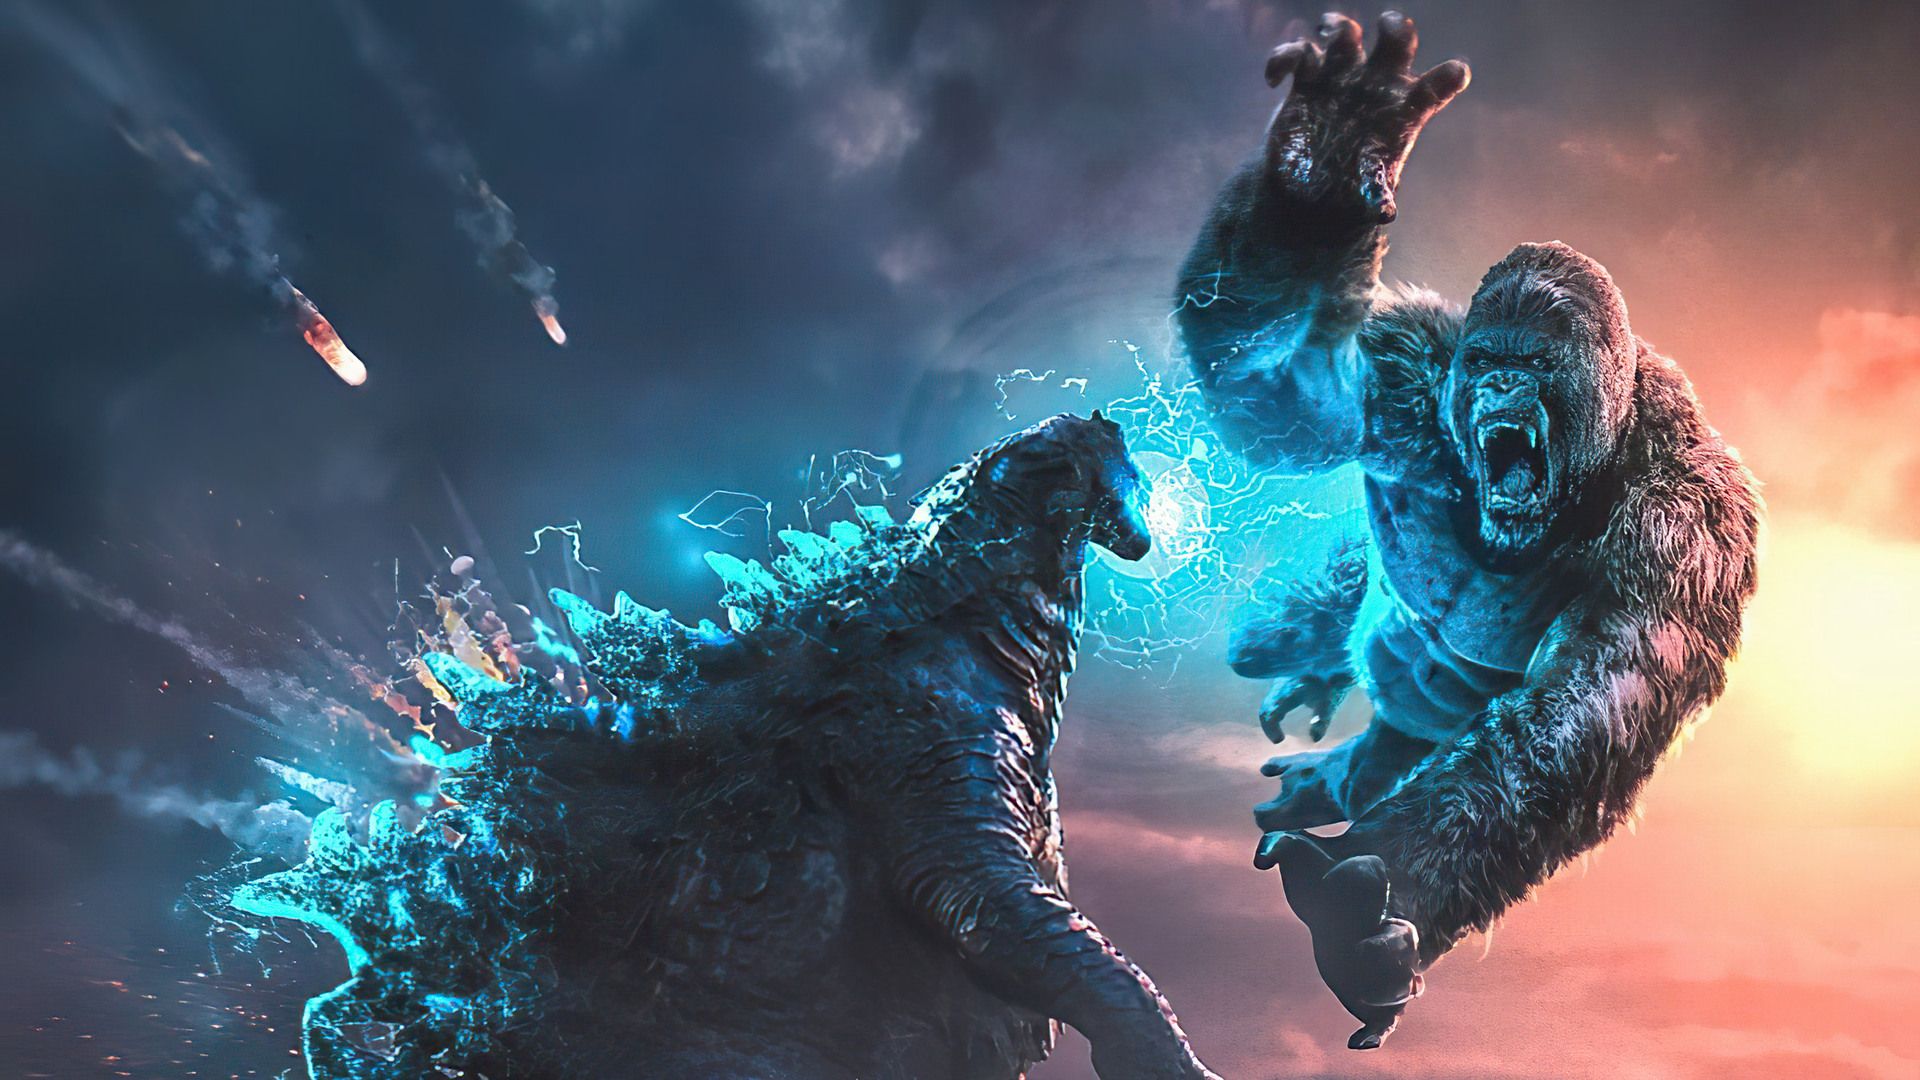 News Viral 157: Godzilla Vs. Kong Wallpaper, HD Wallpaper Godzilla King Kong Vs Godzilla Wallpaper Flare / A Collection Of The Godzilla Vs Kong Wallpaper And Background Available For Download For Free